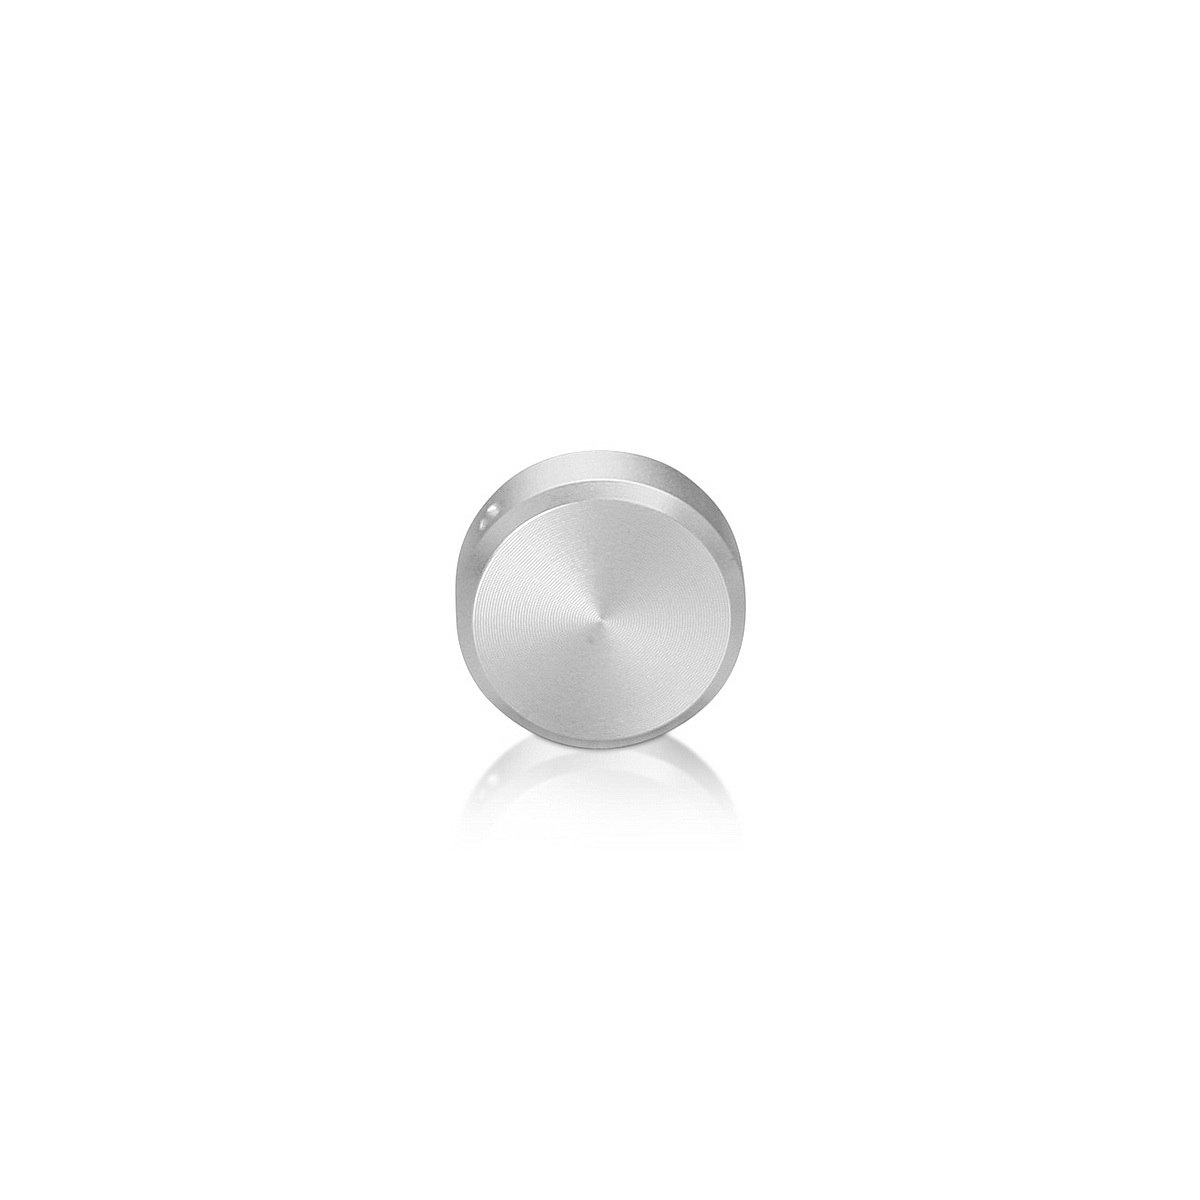 1/4-20 Threaded Locking Caps Diameter: 3/4'', Height: 1/4'', Clear Anodized Aluminum [Required Material Hole Size: 5/16'']